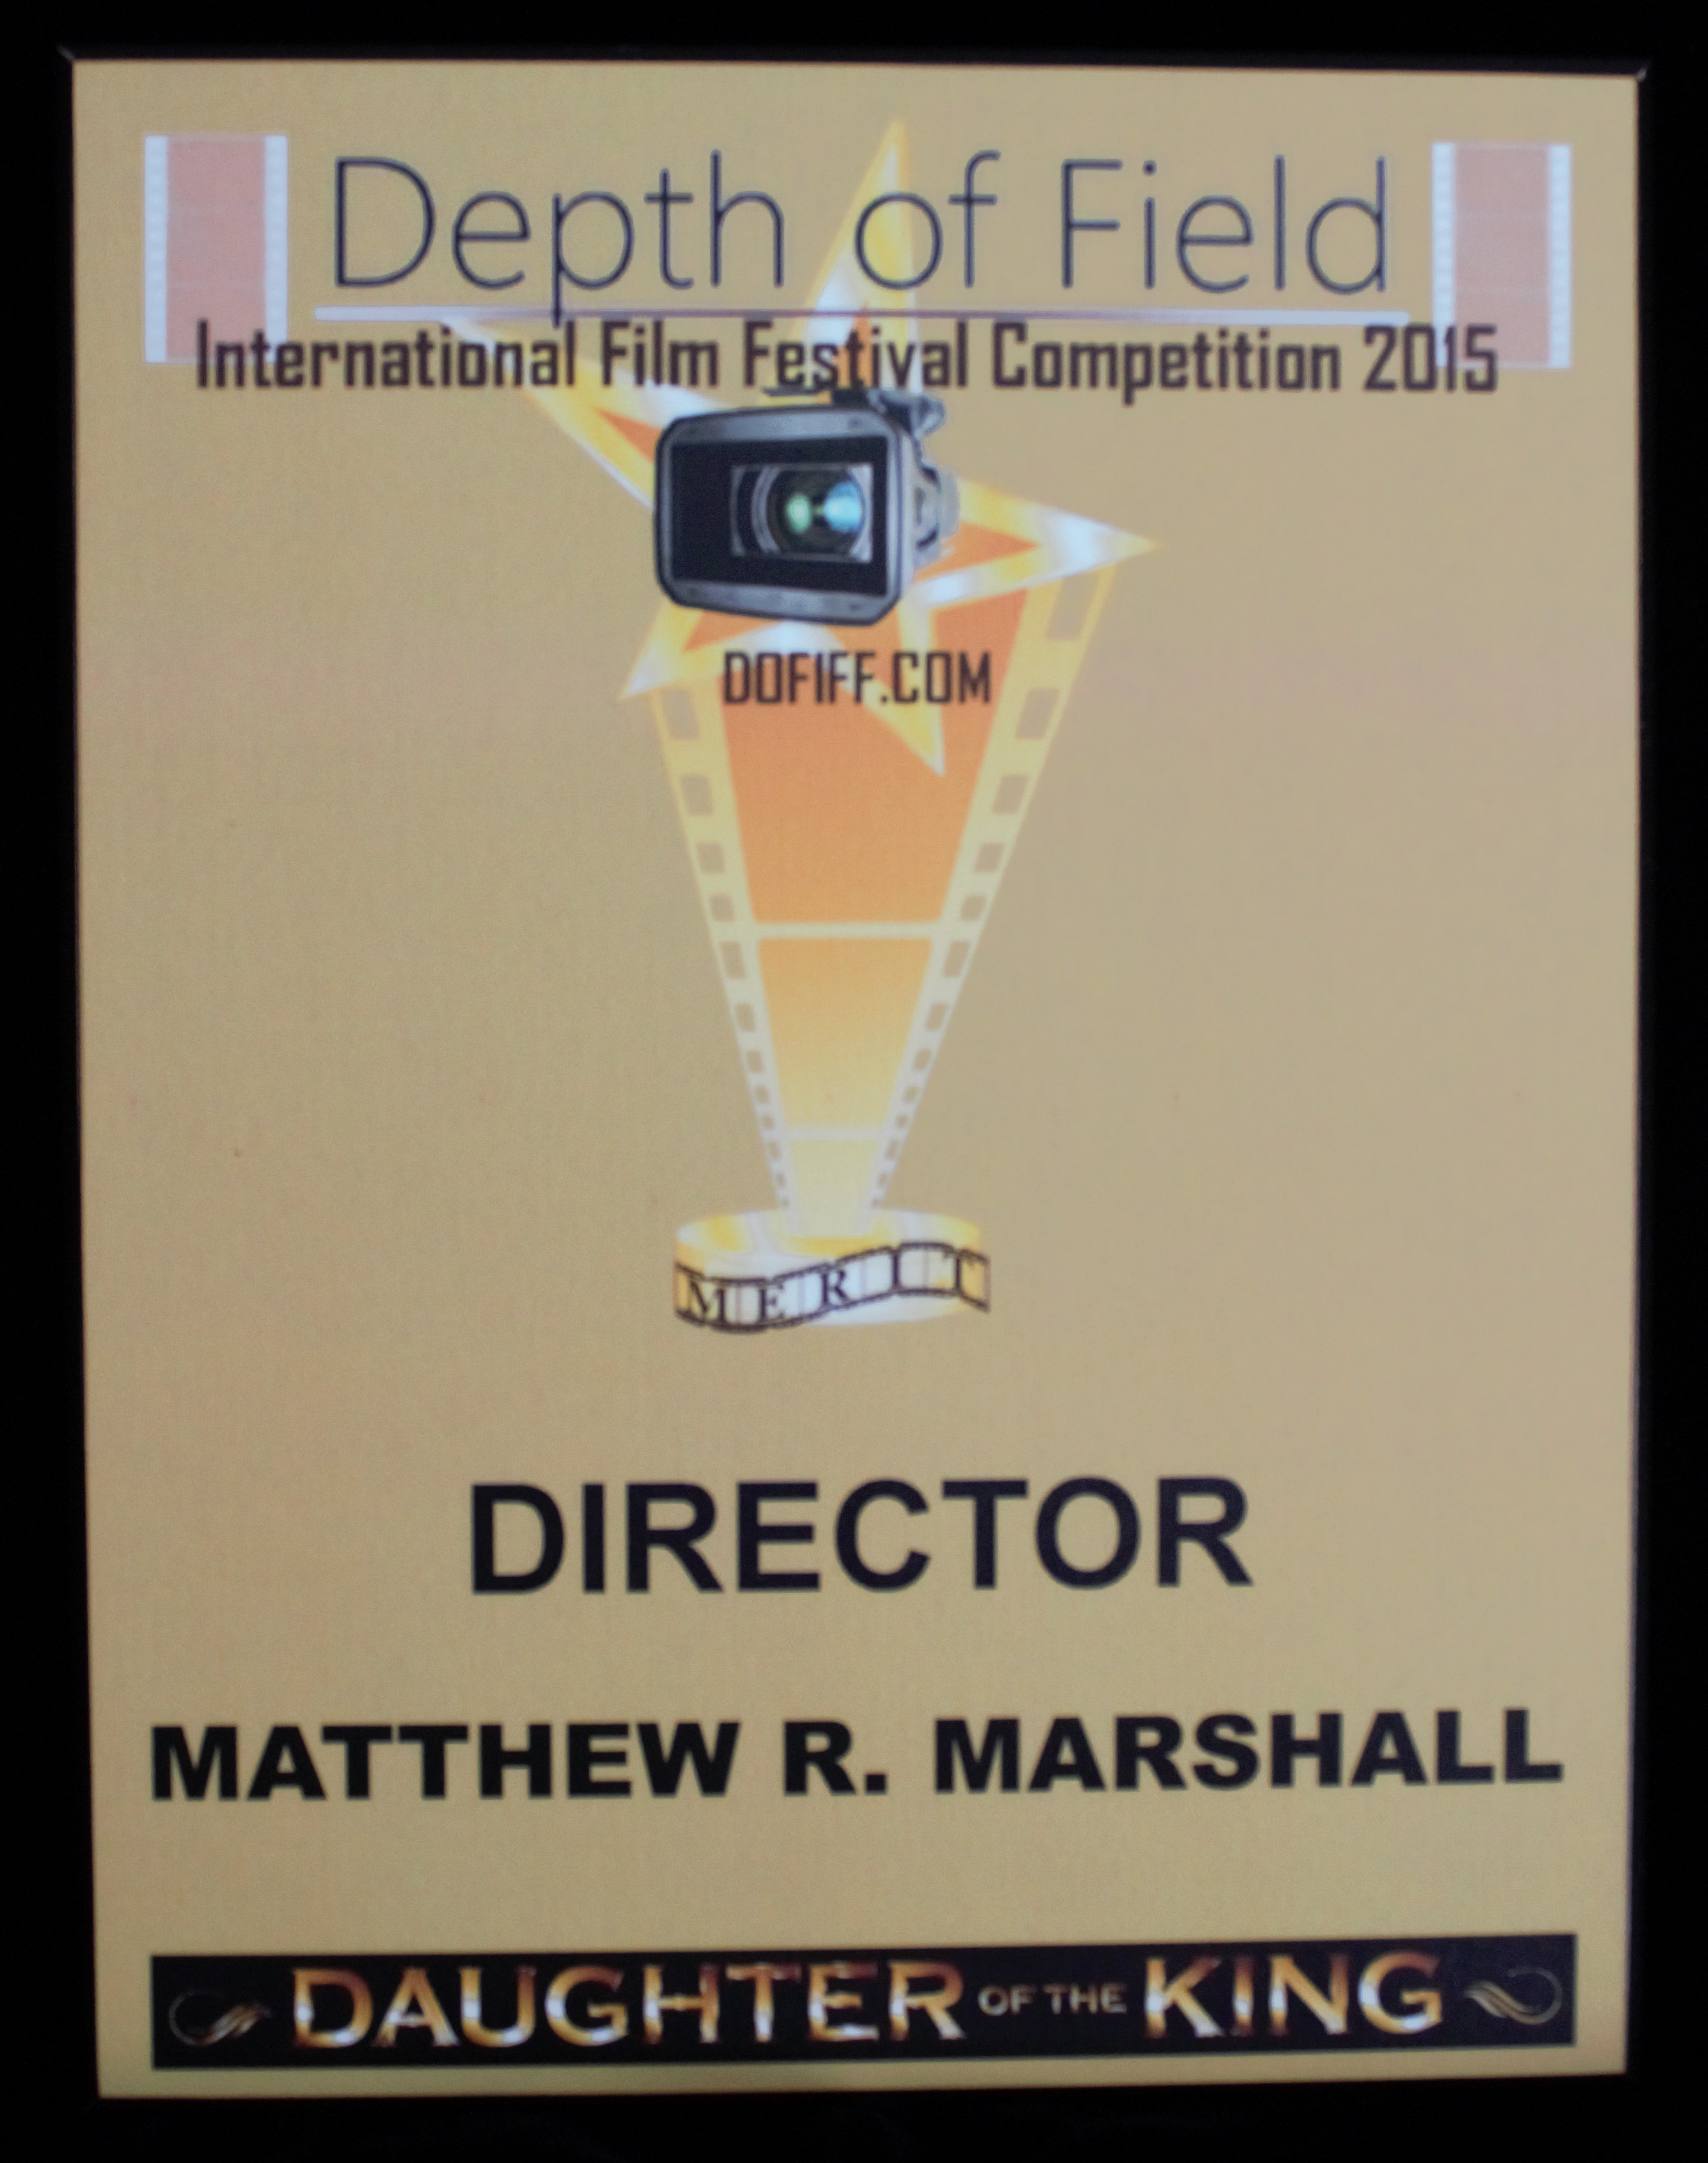 Matthew Marshall won an Award of Merit: Director from Depth of Field International Film Festival Competition 2015. It was one of four awards his film Daughter of the King won from this festival.